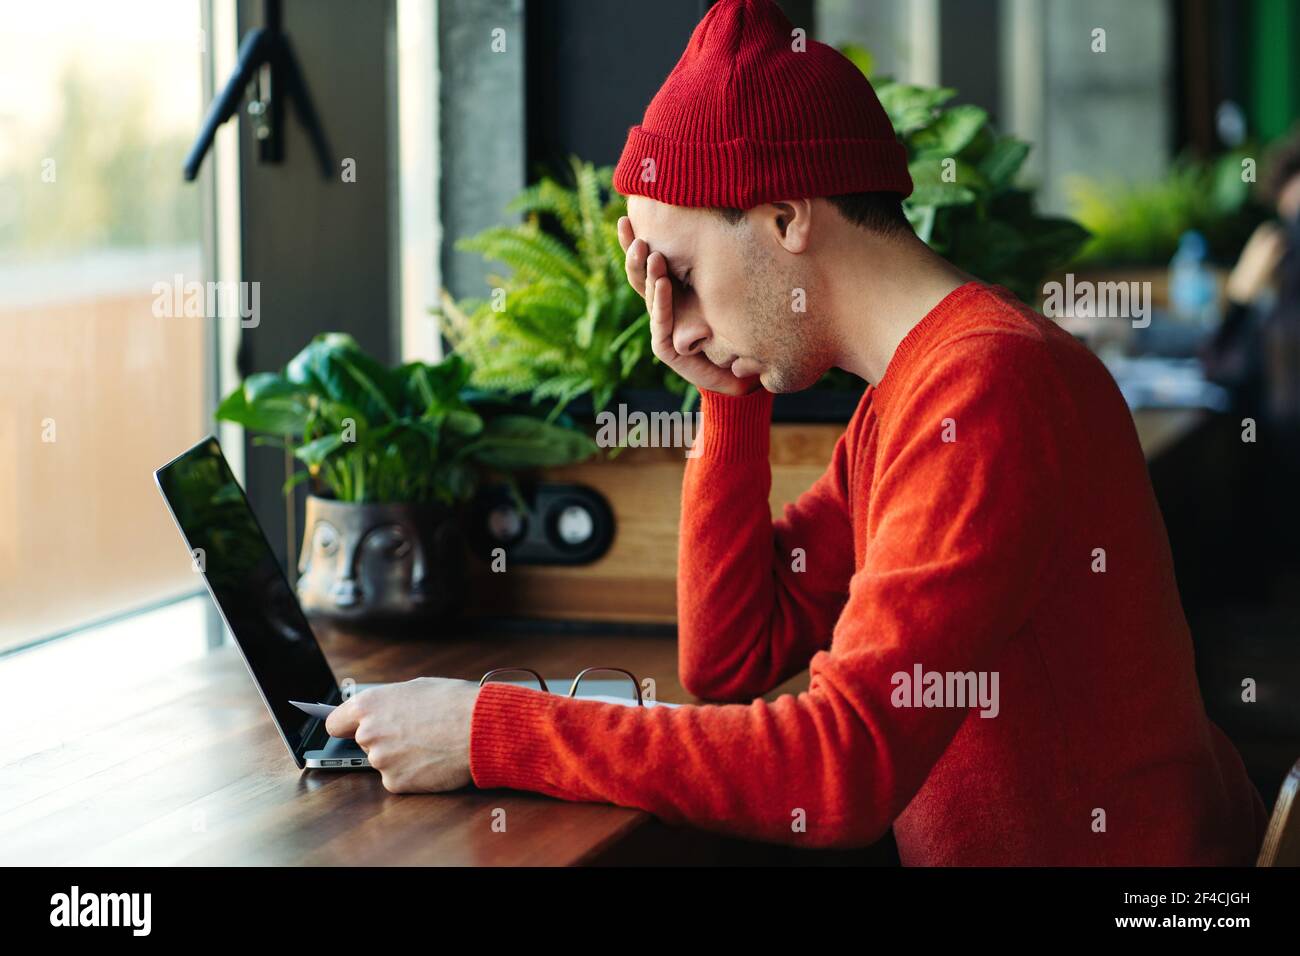 Tired man taking a break during online work on laptop, holding head in hand, feeling lack of energy. Stock Photo